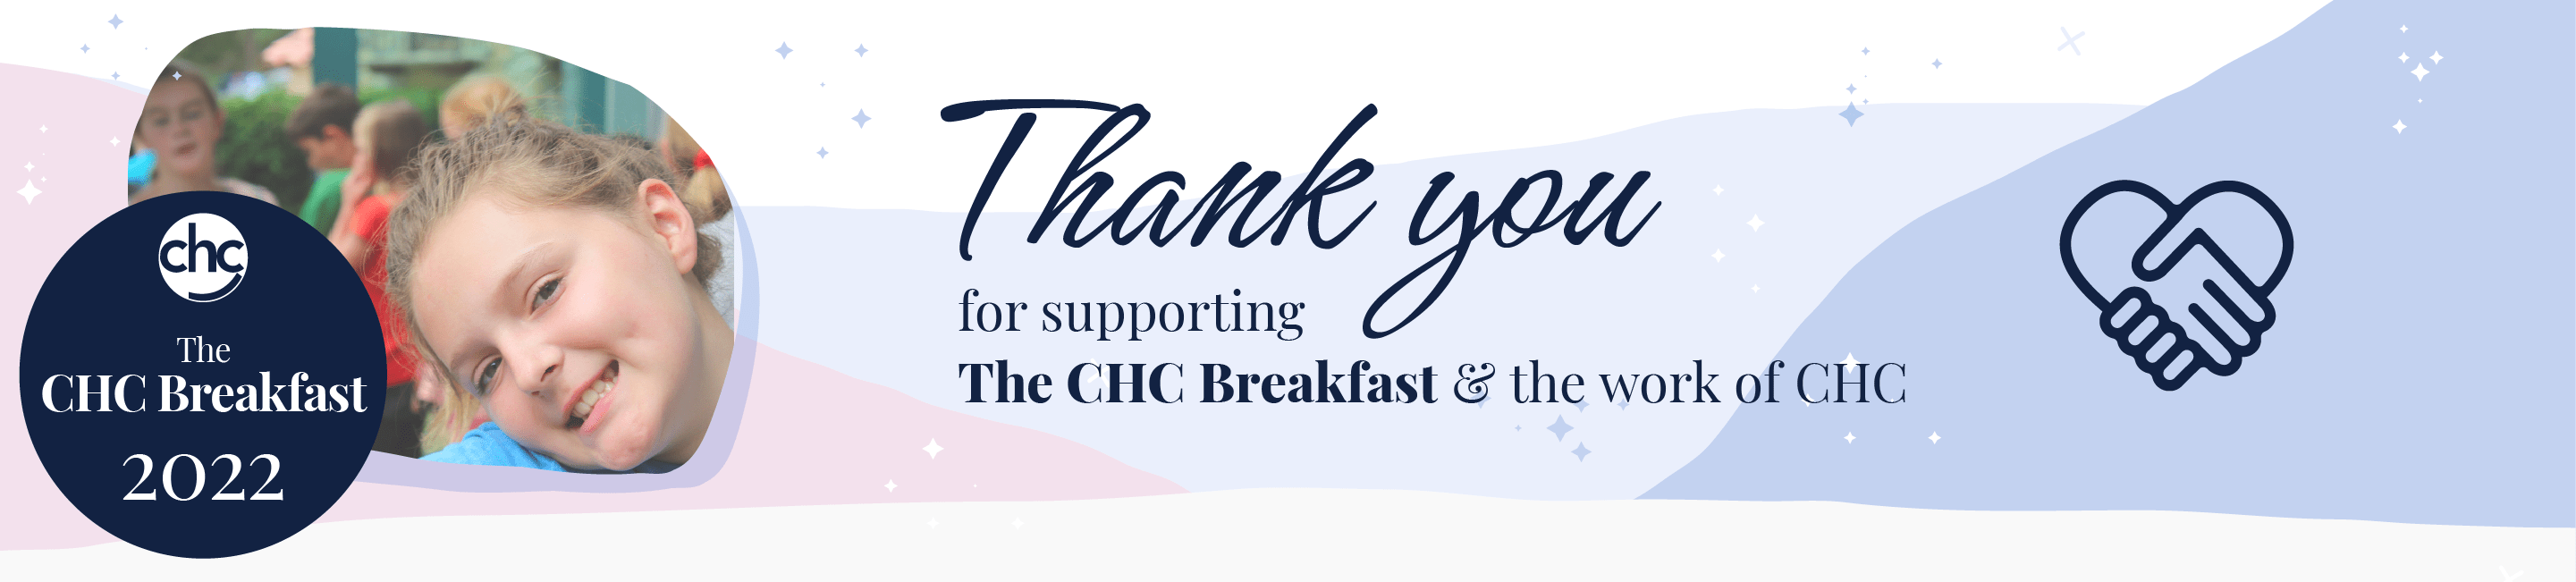 CHC. The CHC Breakfast 2022. Thank you for supporting the CHC Breakfast & the work of CHC